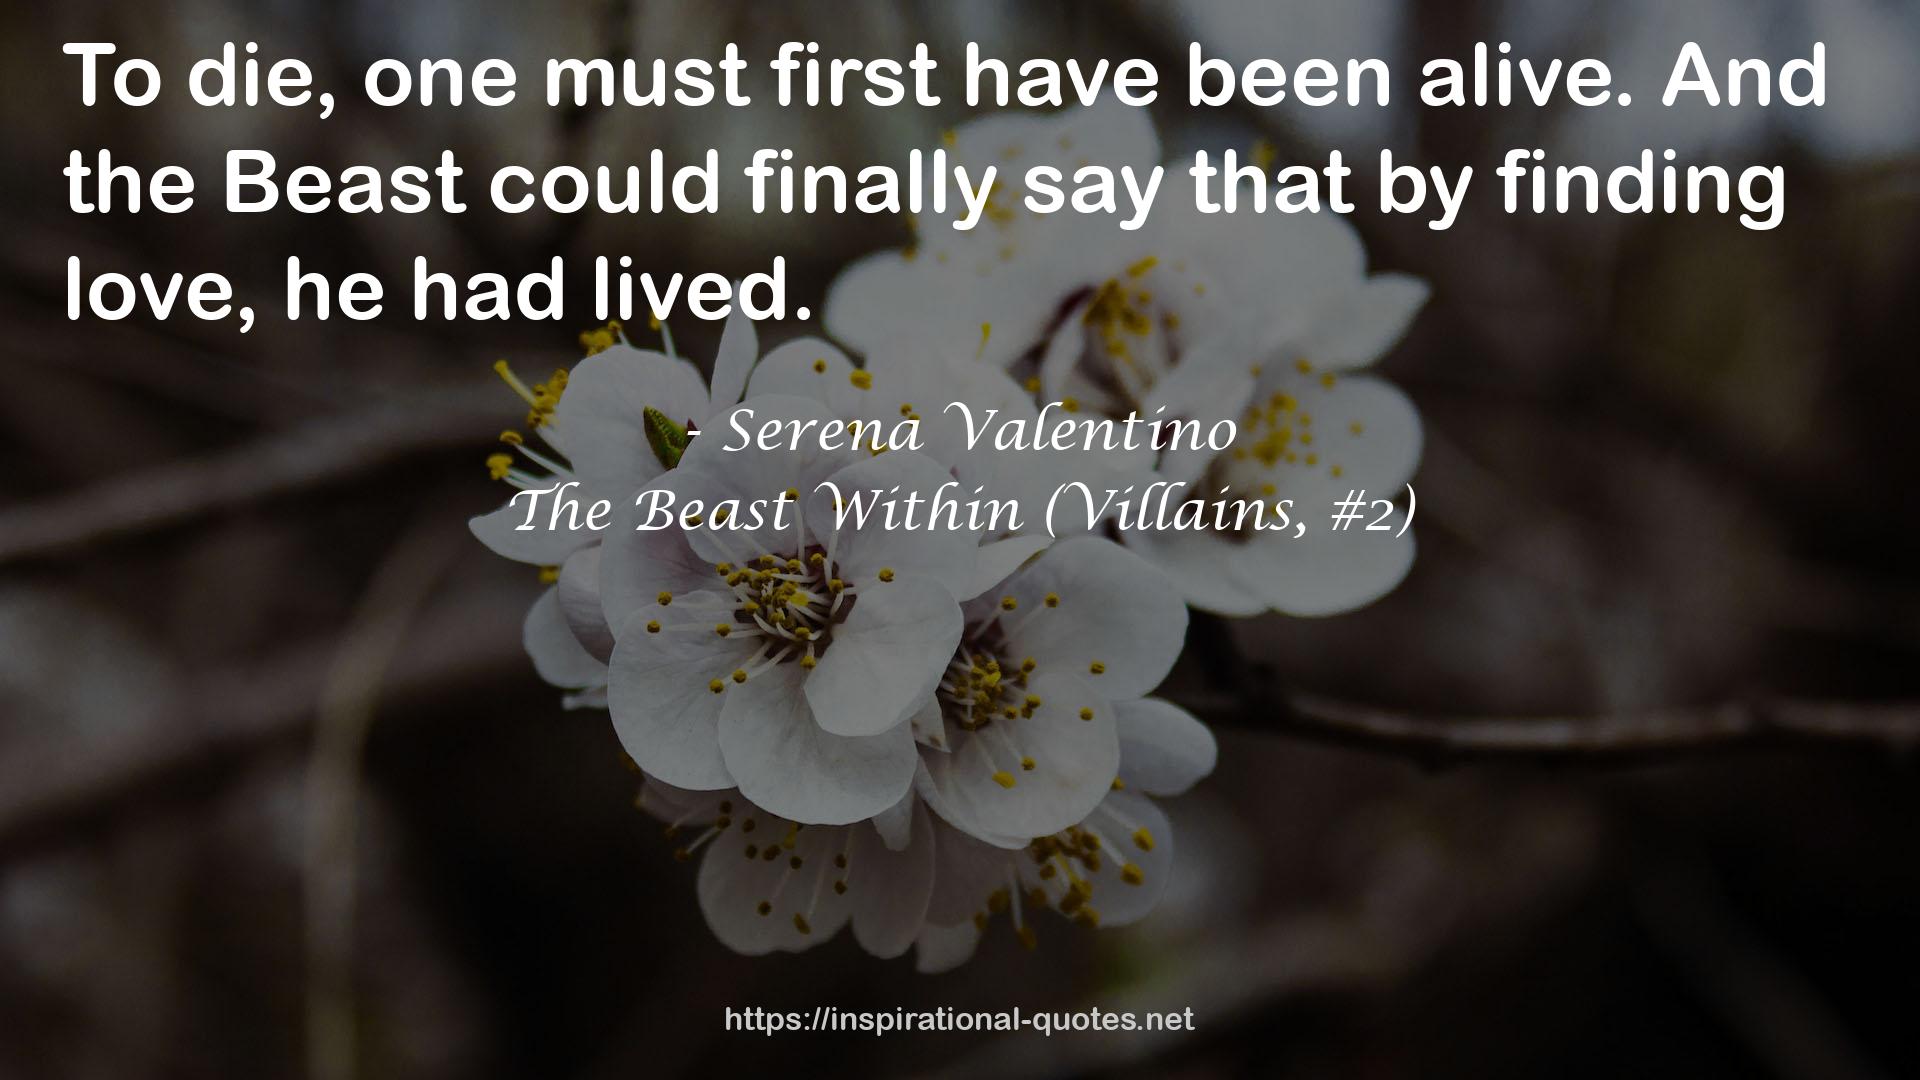 The Beast Within (Villains, #2) QUOTES